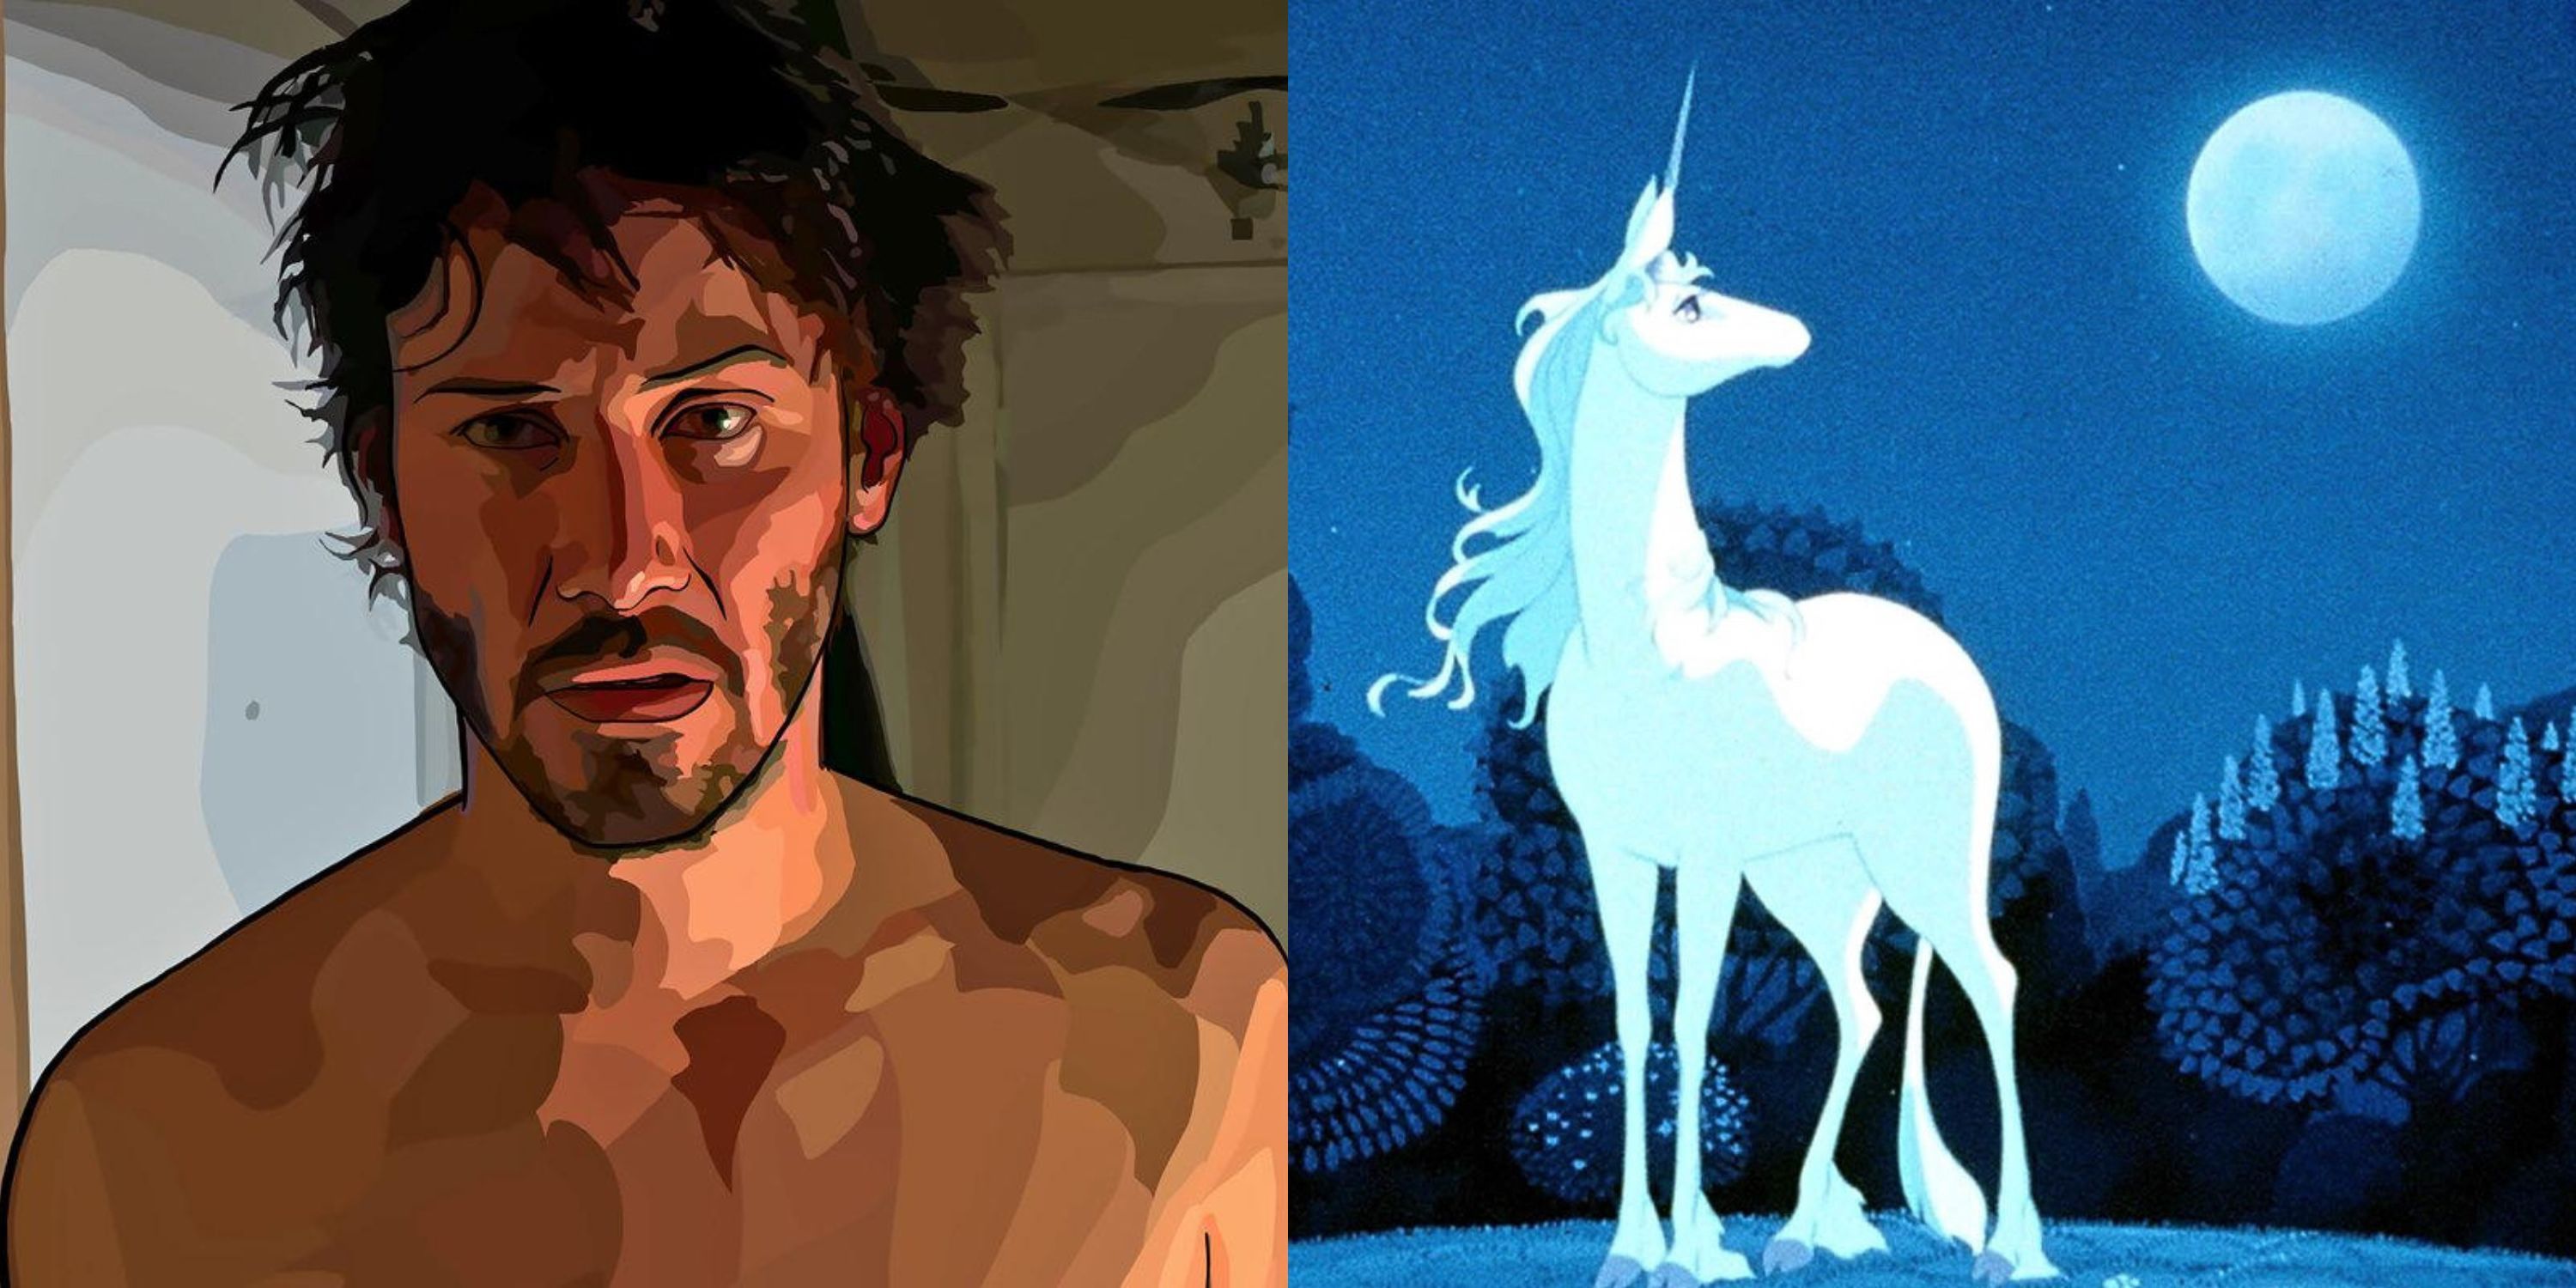 Featured image Keanu Reeves in A Scanner Darkly and The Last Unicorn